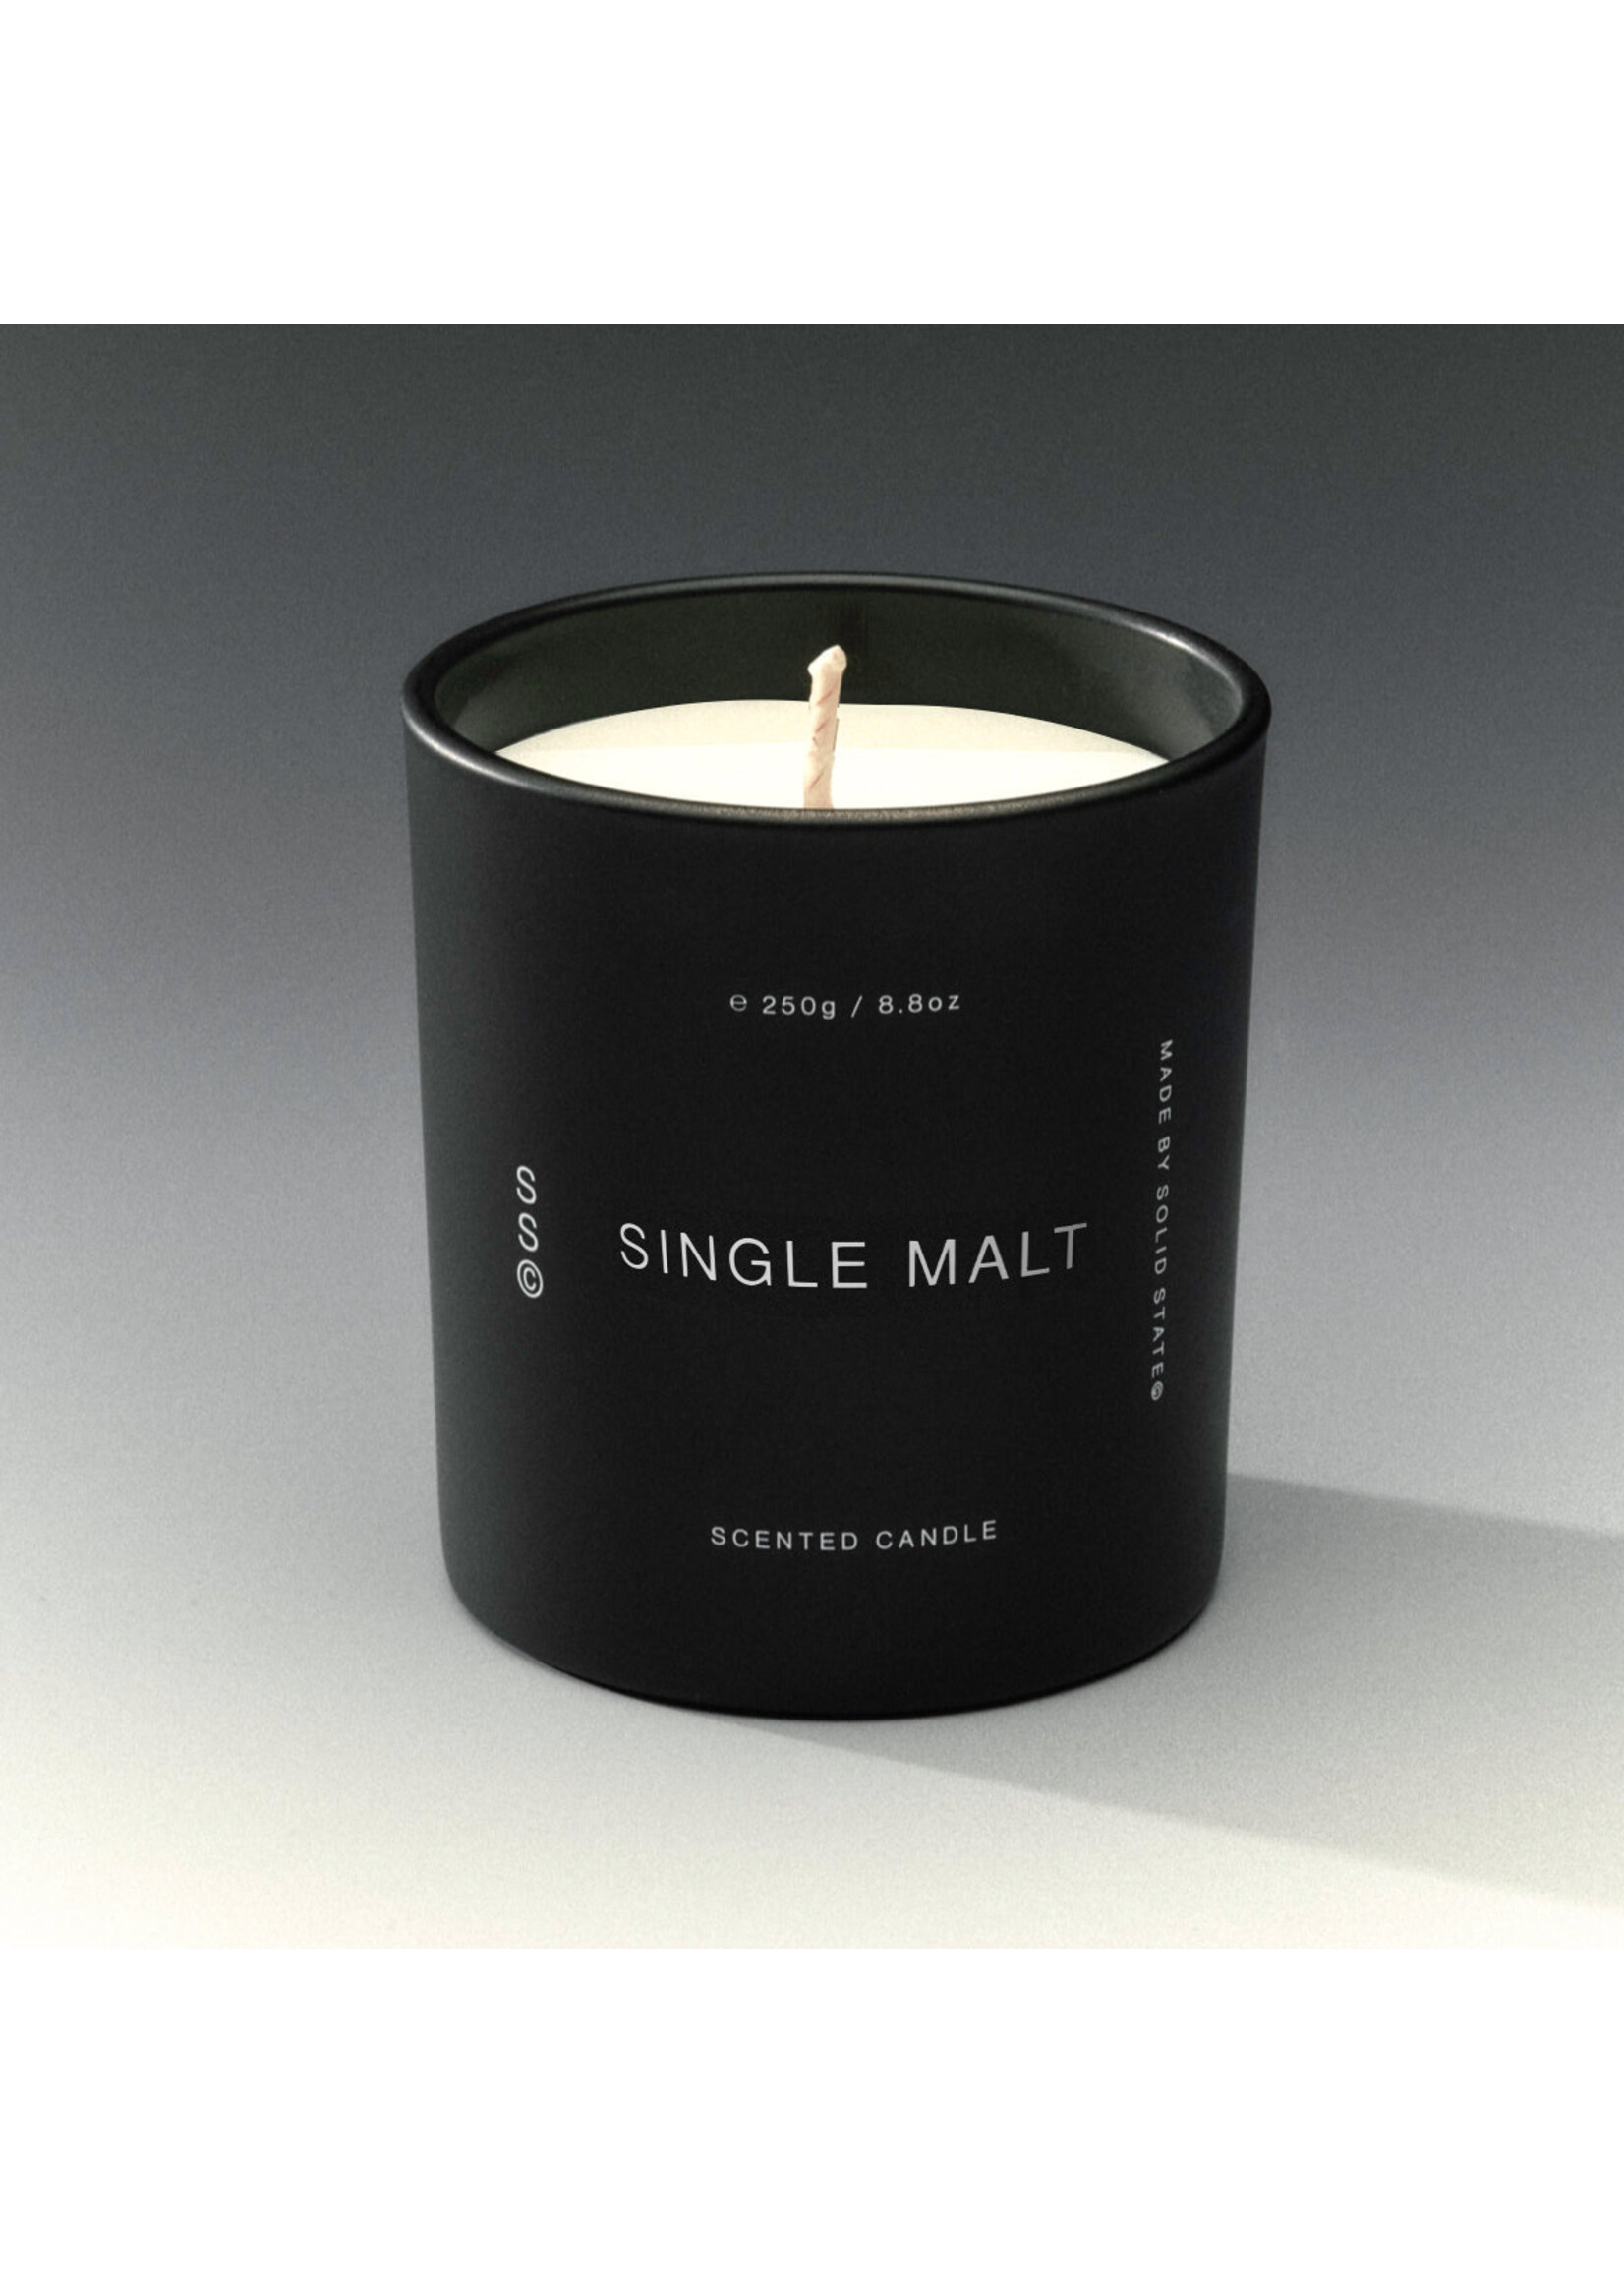 Solid State Solid State Scented Candle